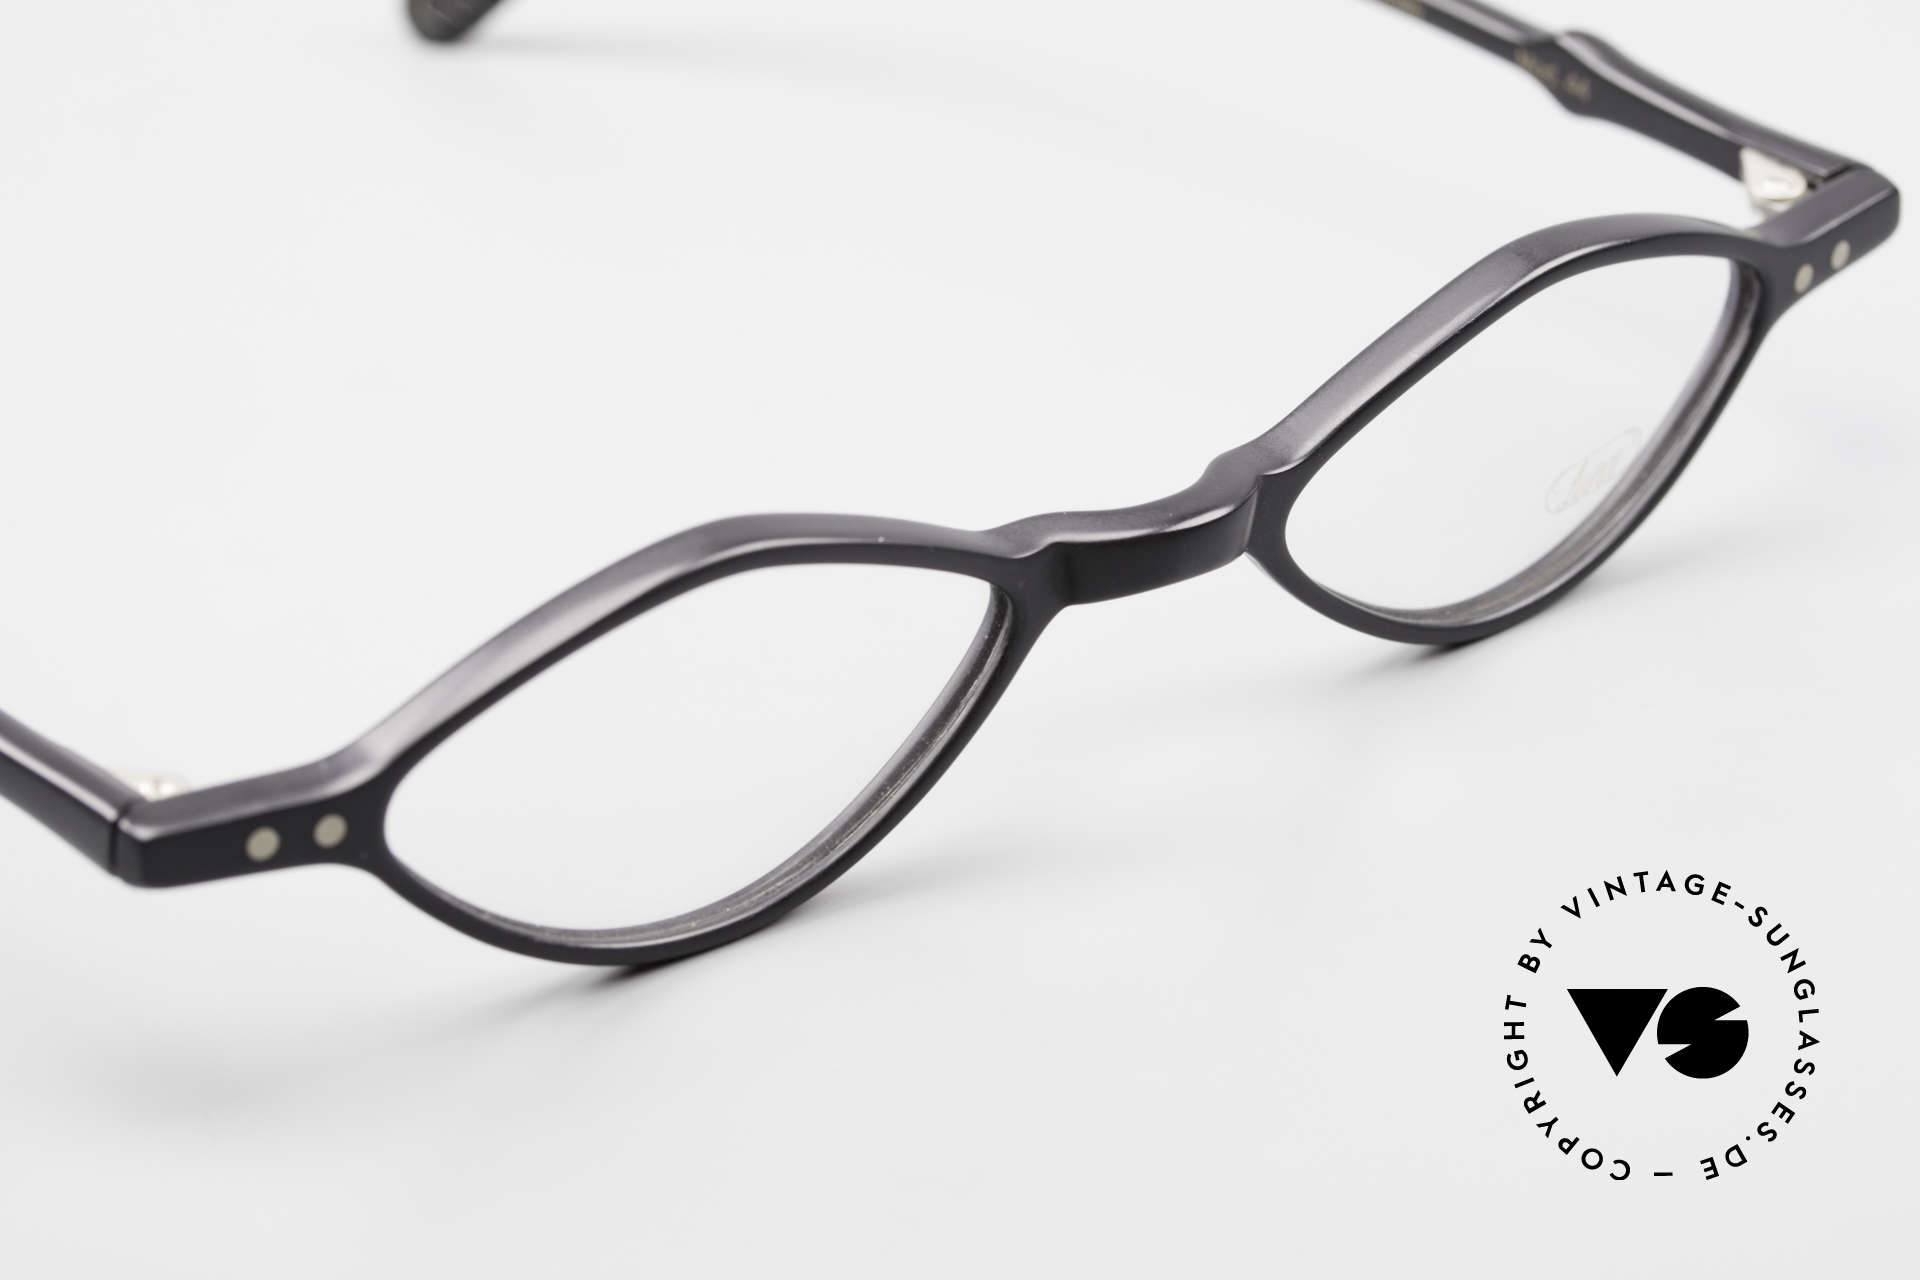 Lunor A44 Reading Glasses Acetate Frame, unworn (like all our vintage Lunor frames & sunglasses), Made for Men and Women